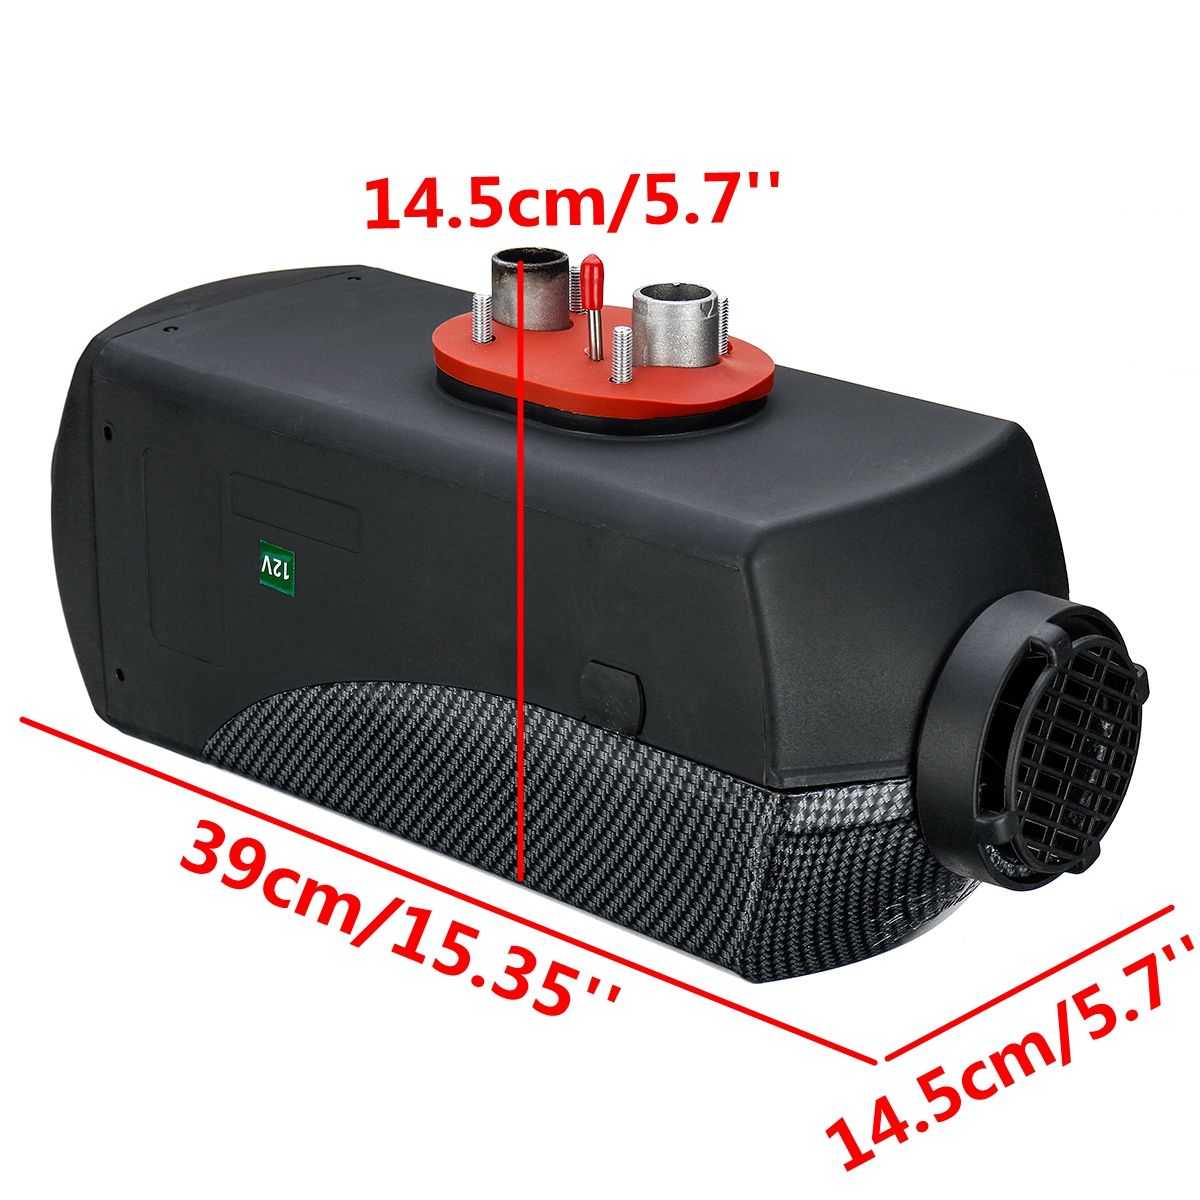 12V-5KW-Car-Parking-Heater-Diesel-Air-Adjustable-Hot-Remote-Control-LCD-Display-For-Truck-SUV-Bus-RV-1384762